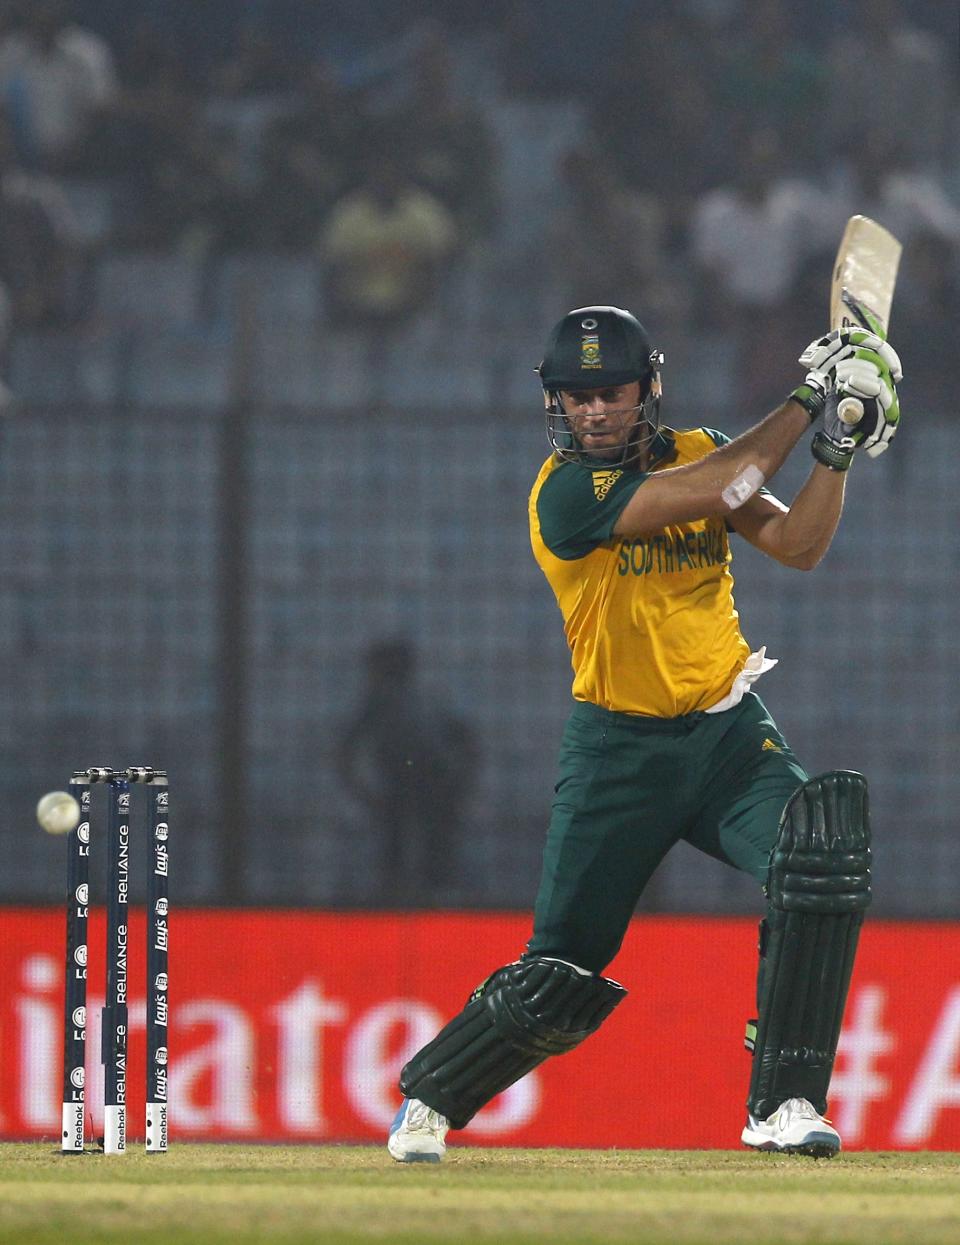 South Africa's AB de Villiers plays a shot during their ICC Twenty20 Cricket World Cup match against England in Chittagong, Bangladesh, Saturday, March 29, 2014. (AP Photo/A.M. Ahad)